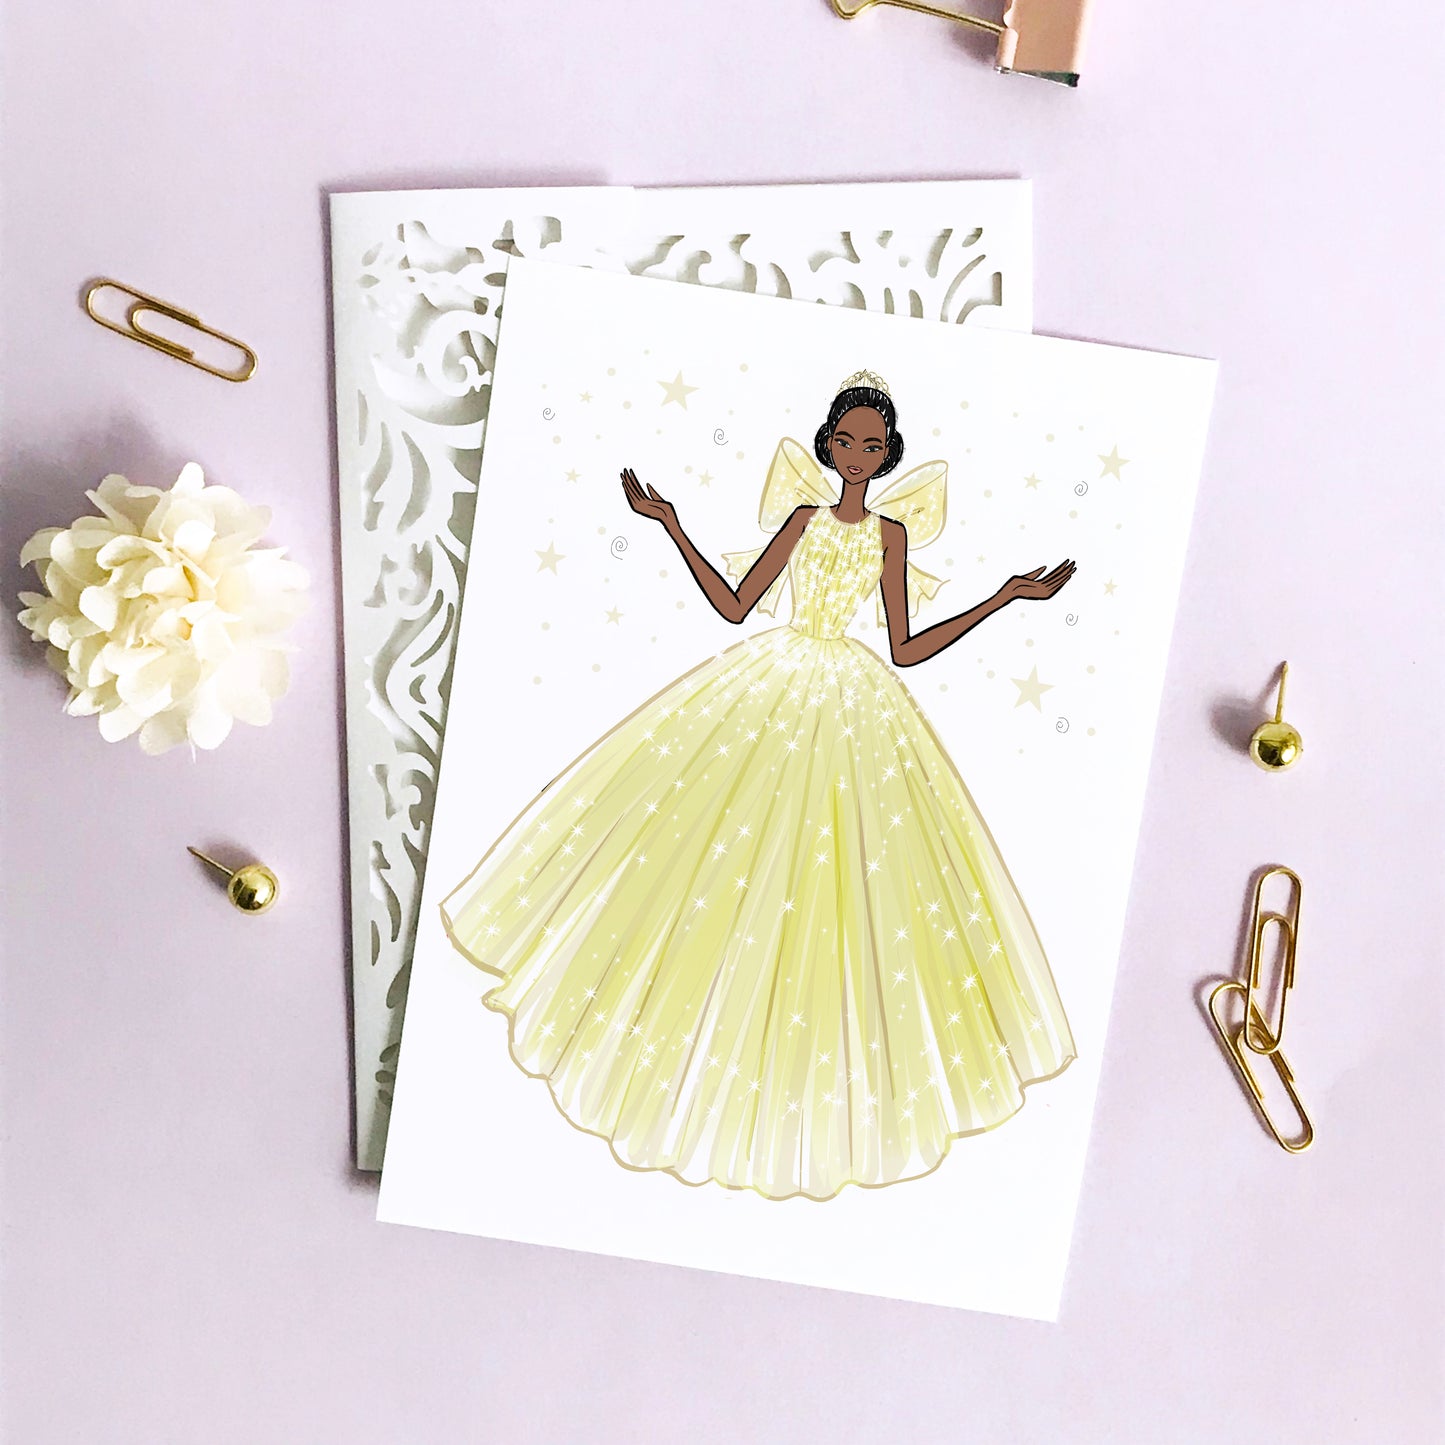 Greeting Card Collection- "Kingdom Dreams" (Yellow Delights)